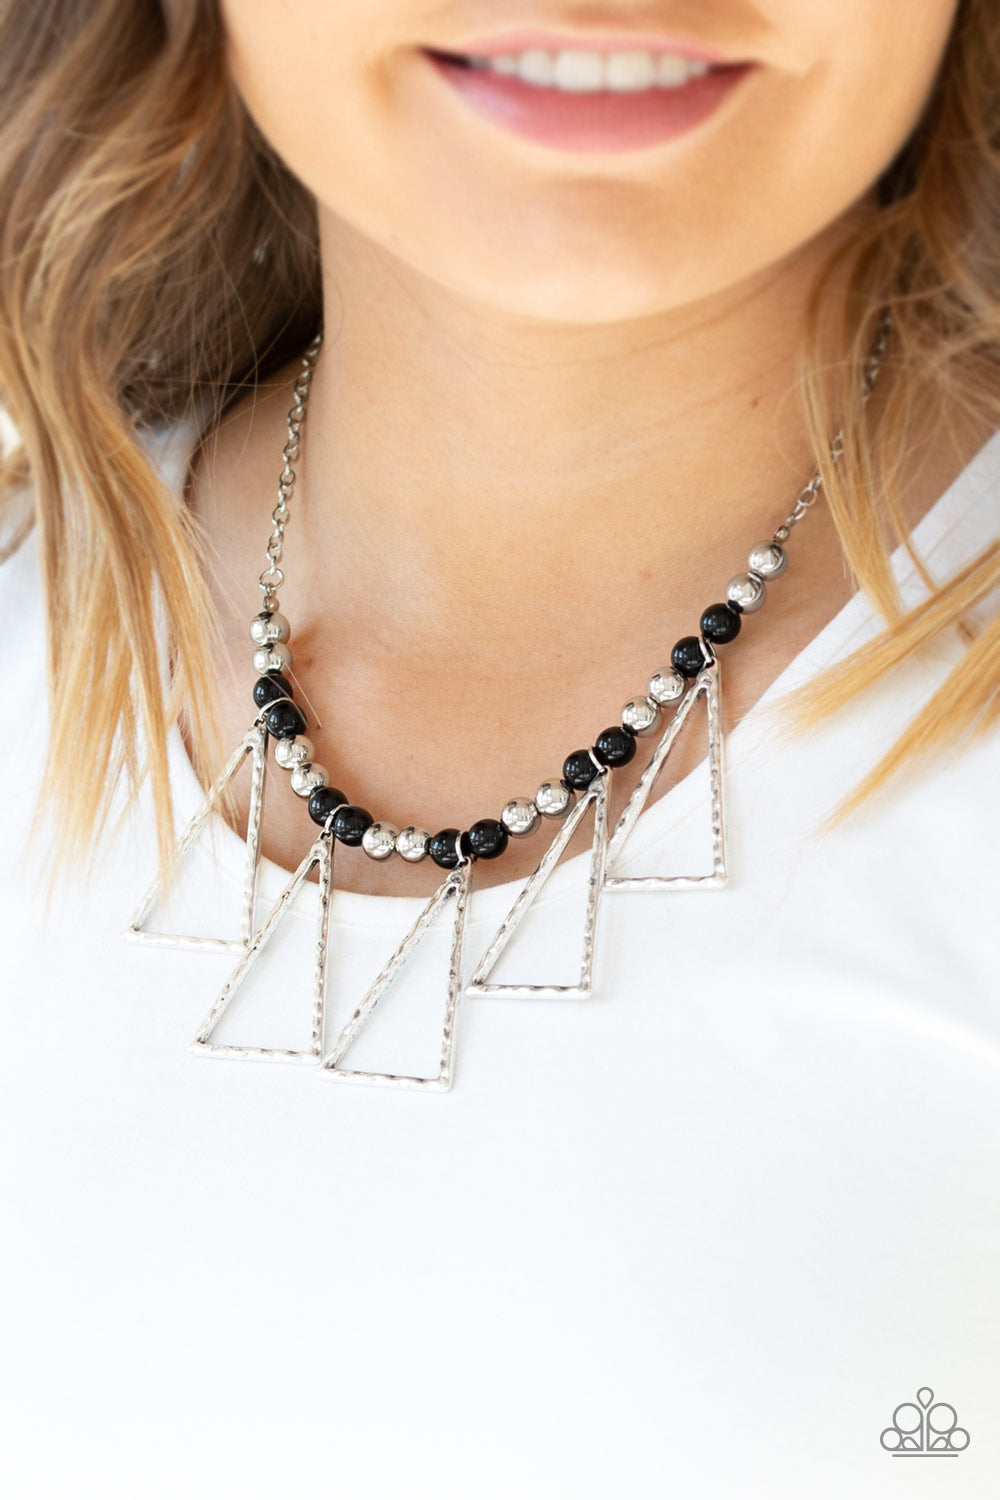 Terra Nouveau - Black and Silver Necklace - Paparazzi Accessories - A collection of shiny silver and refreshing black beads are threaded along an invisible wire below the collar. Hammered triangular frames swing from the bottom of the colorful compilation, creating an artistic fringe. Features an adjustable clasp closure.